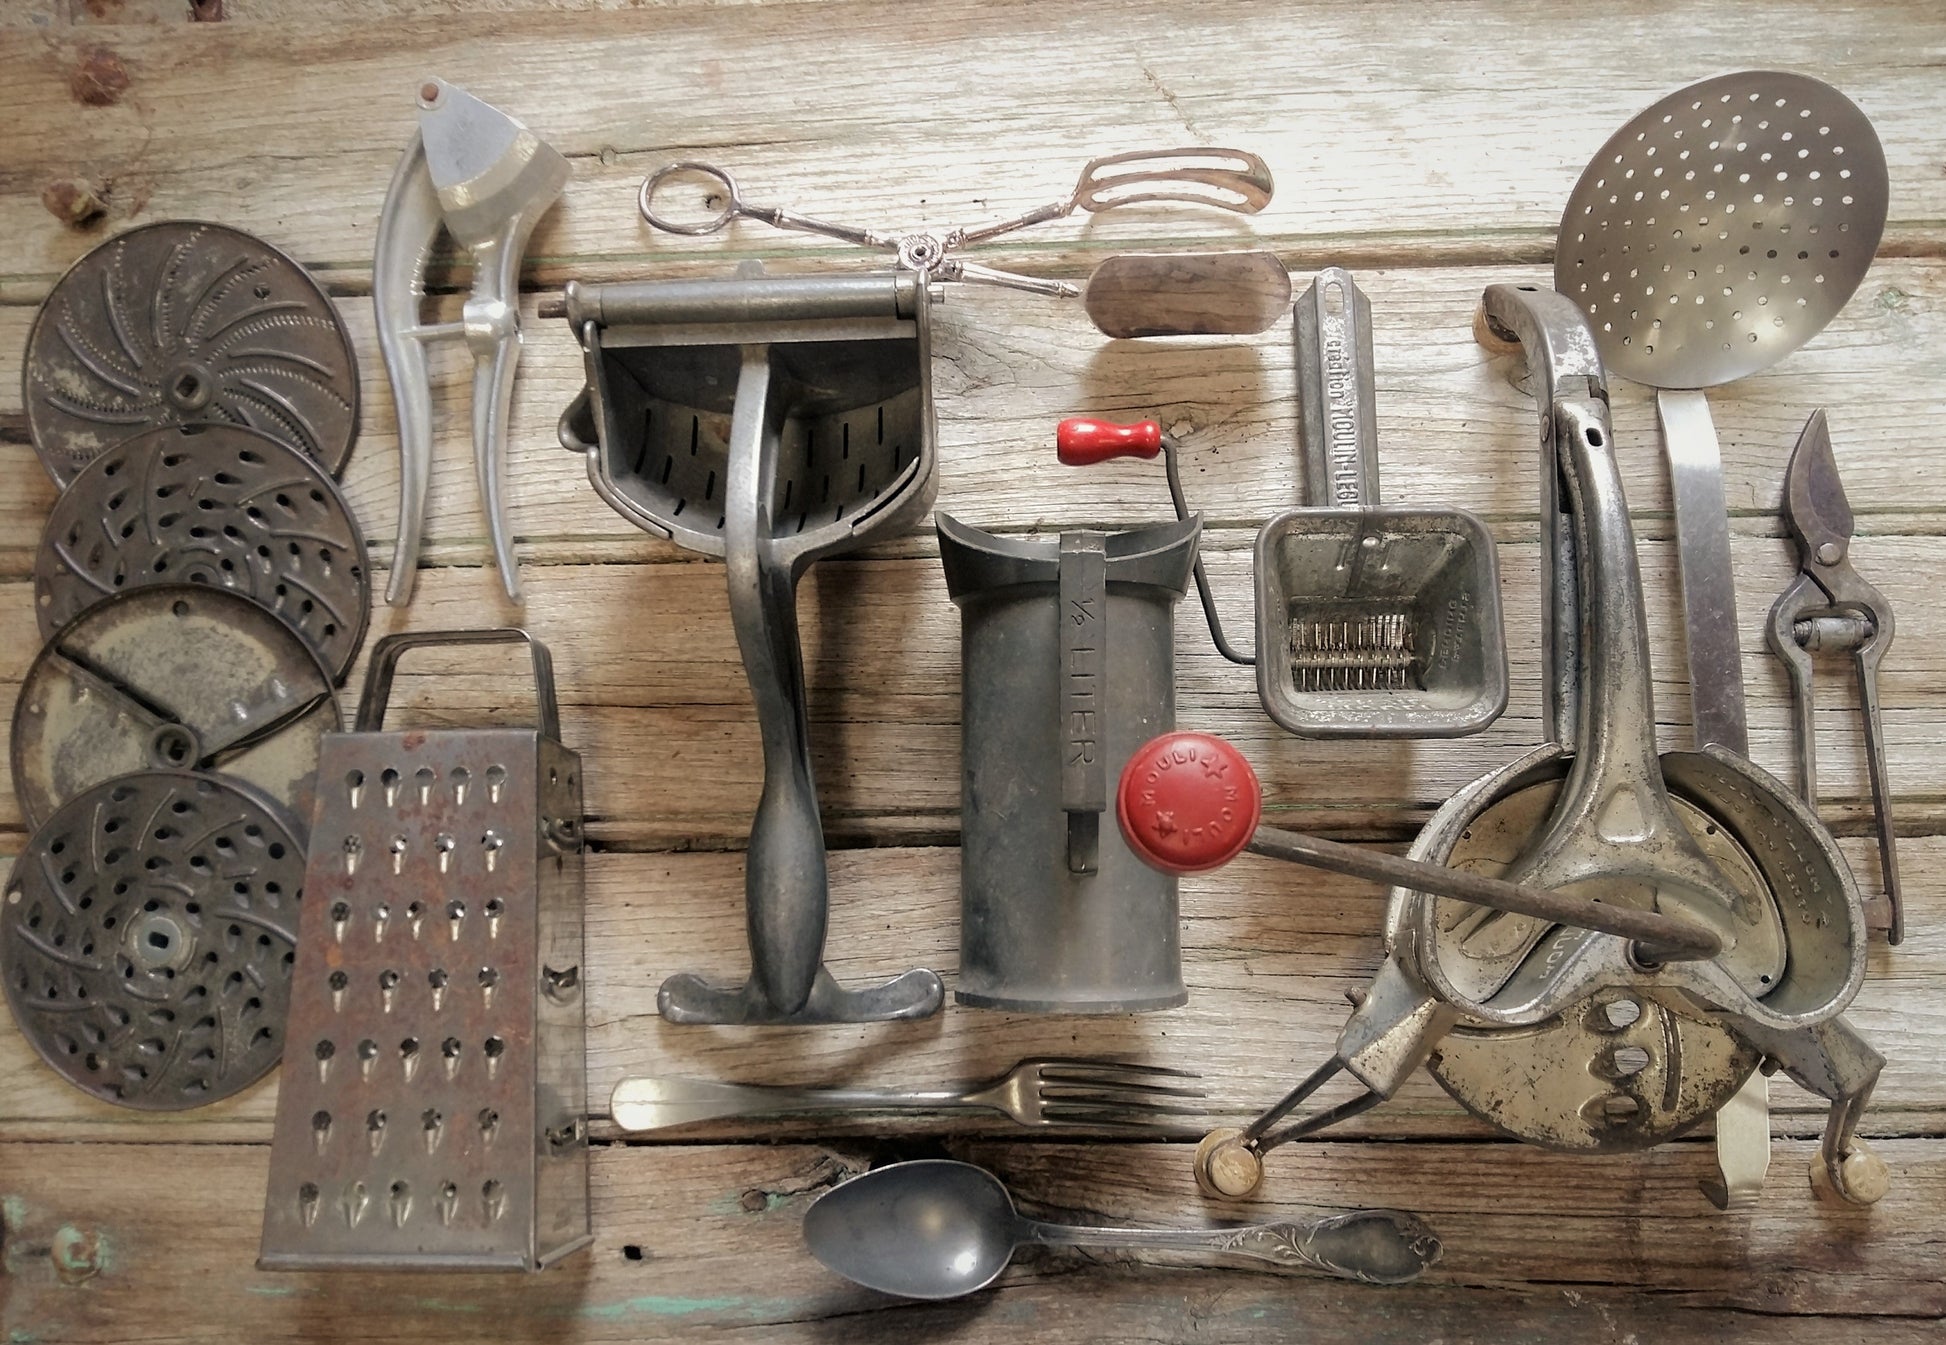 Set of 18 Rustic Kitchen Utensils. by Tiggy and Pip